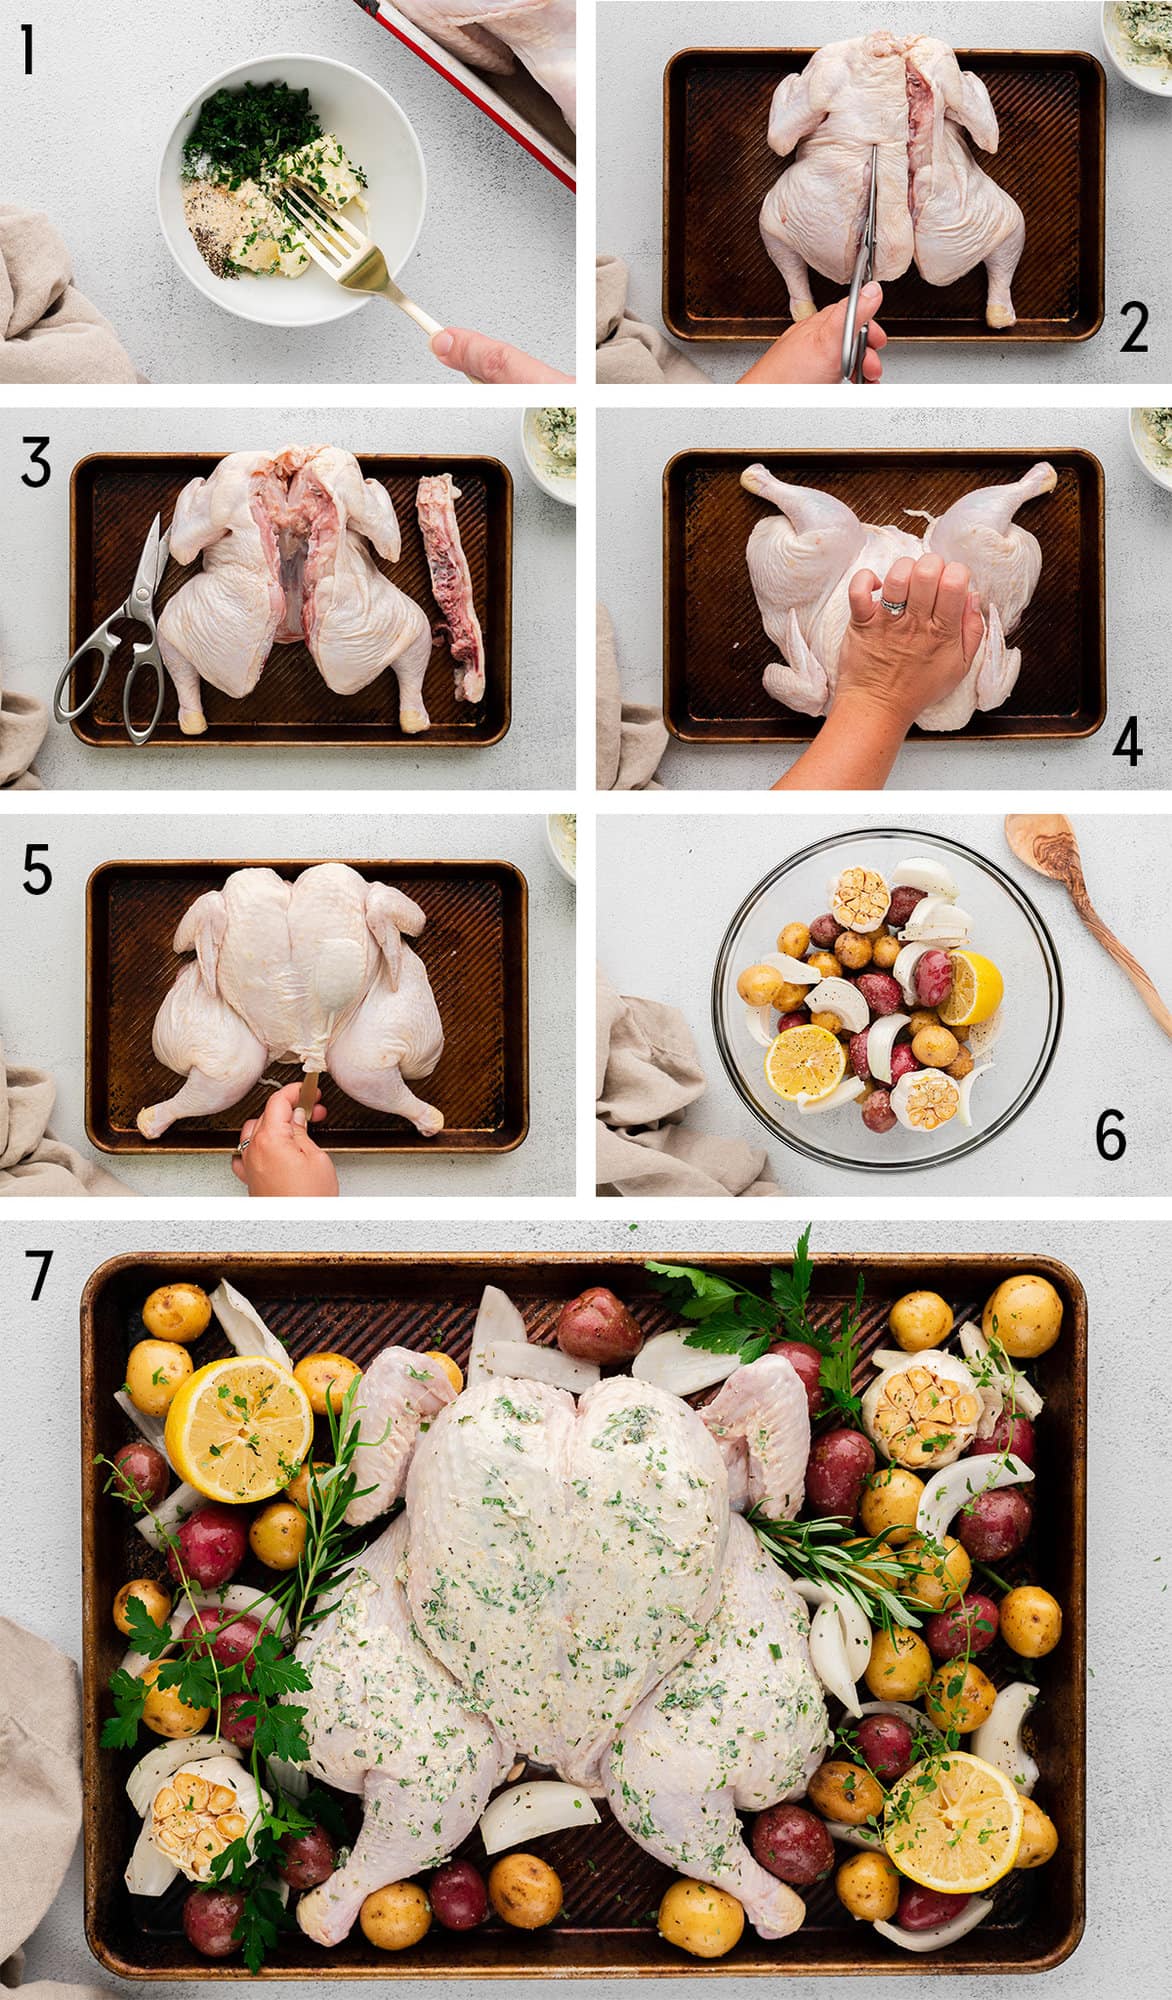 Collage of images depicting the process for prepping and roasting a spatchcock chicken.